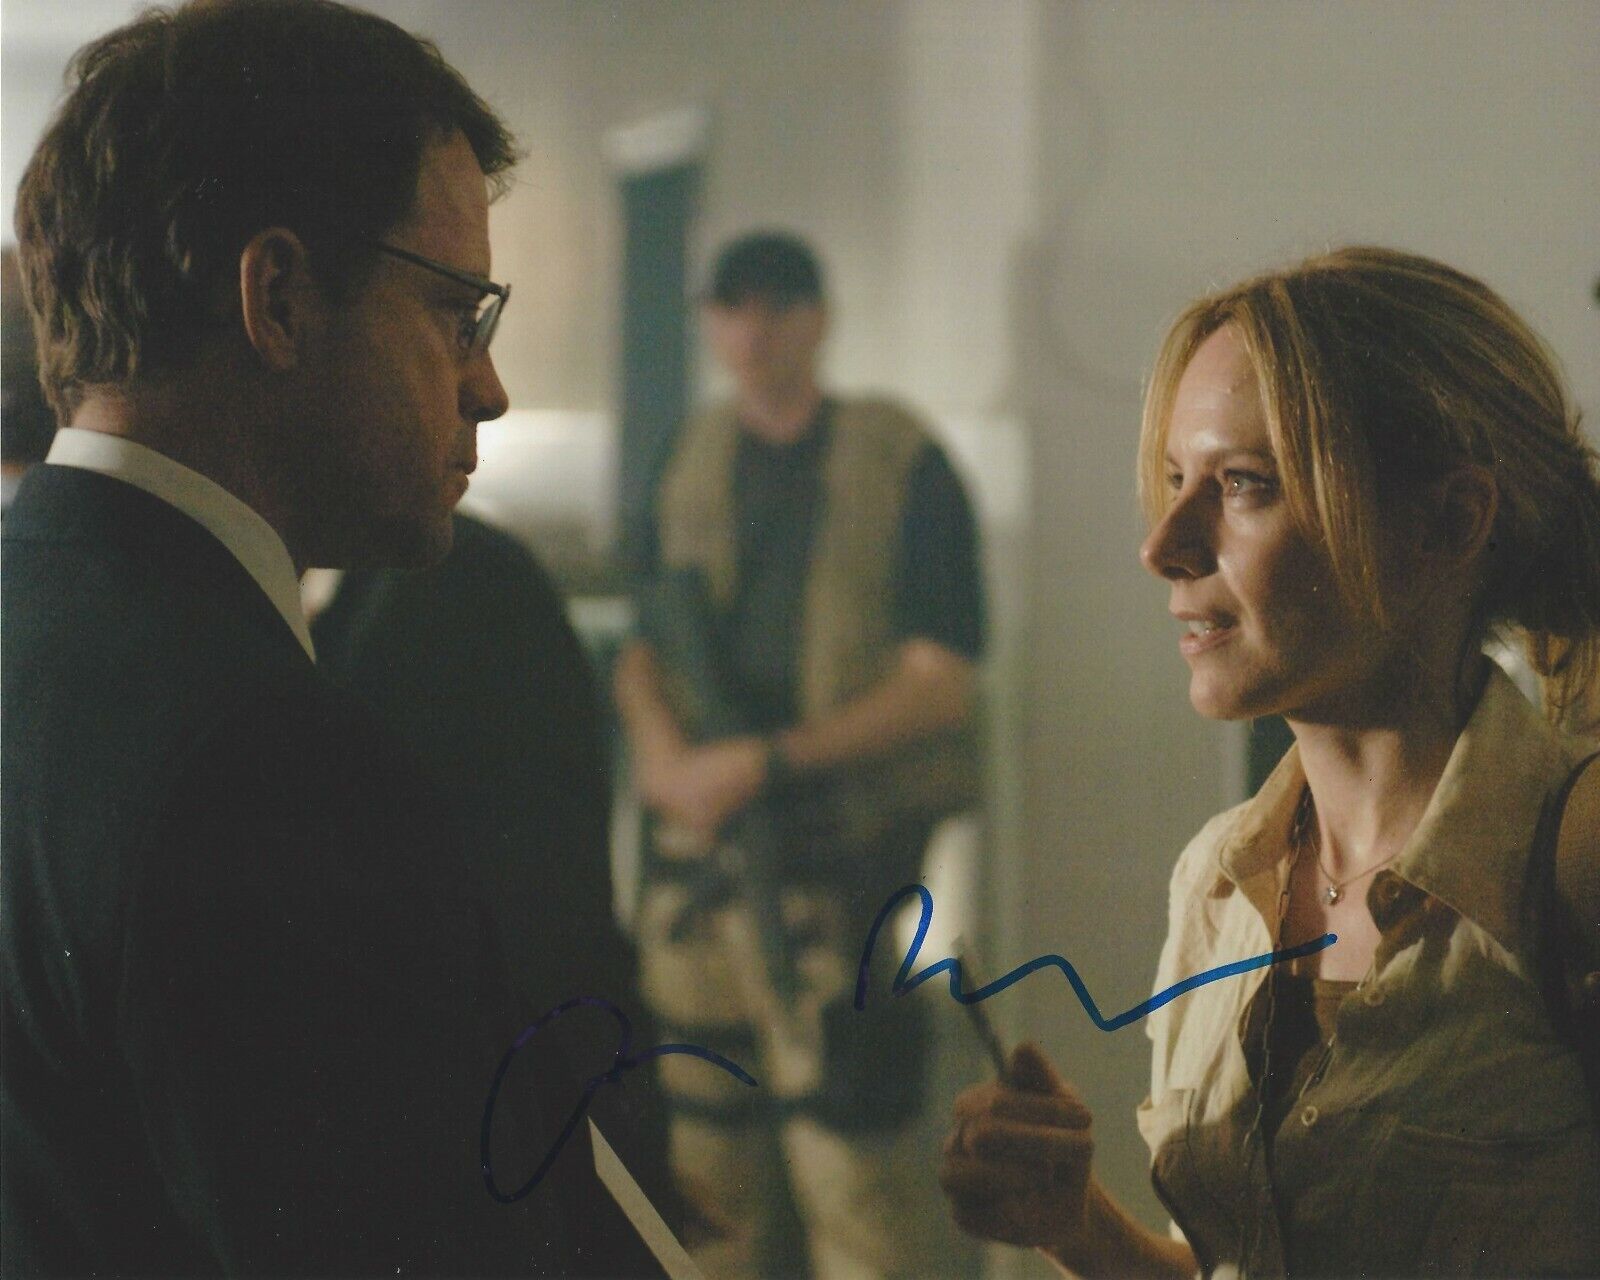 ACTRESS AMY RYAN SIGNED 8x10 Photo Poster painting 1 w/COA THE OFFICE GONE BABY GONE BIRDMAN